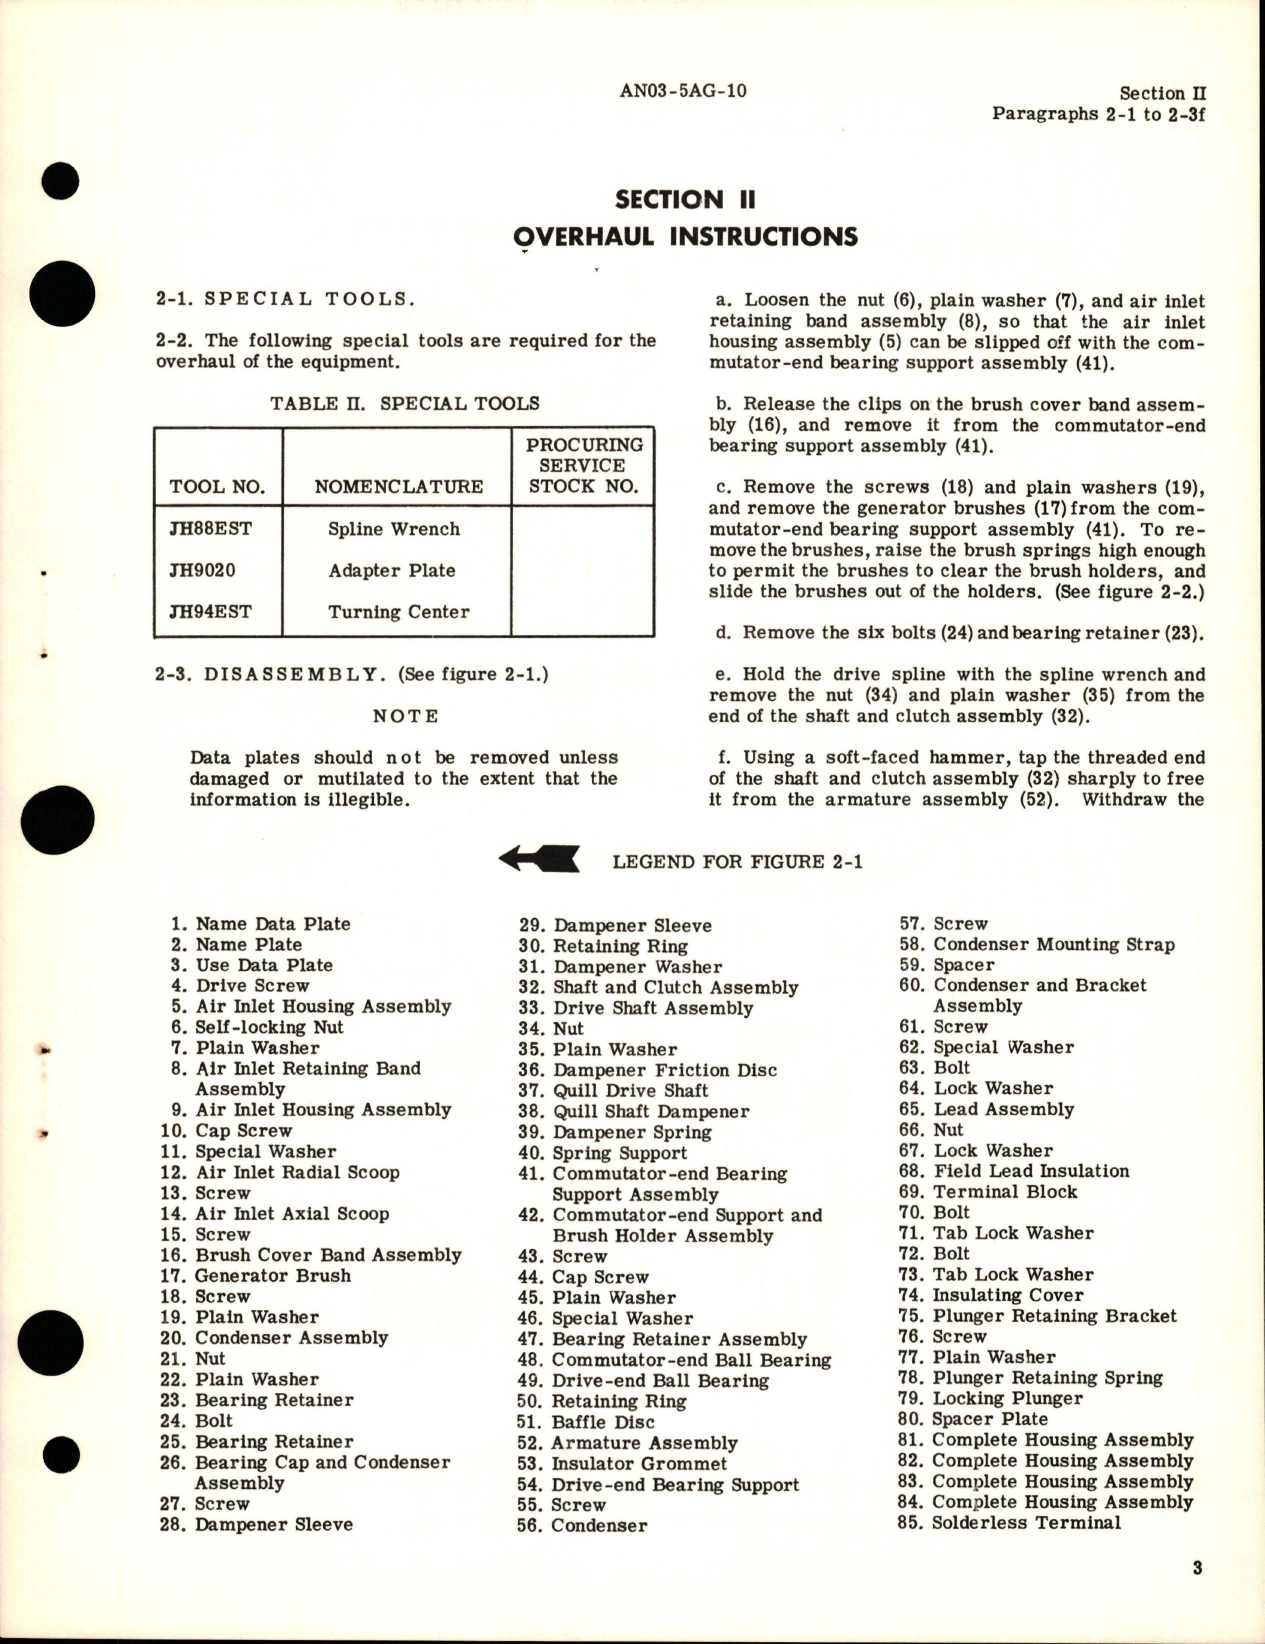 Sample page 7 from AirCorps Library document: Overhaul Instructions for Generator 